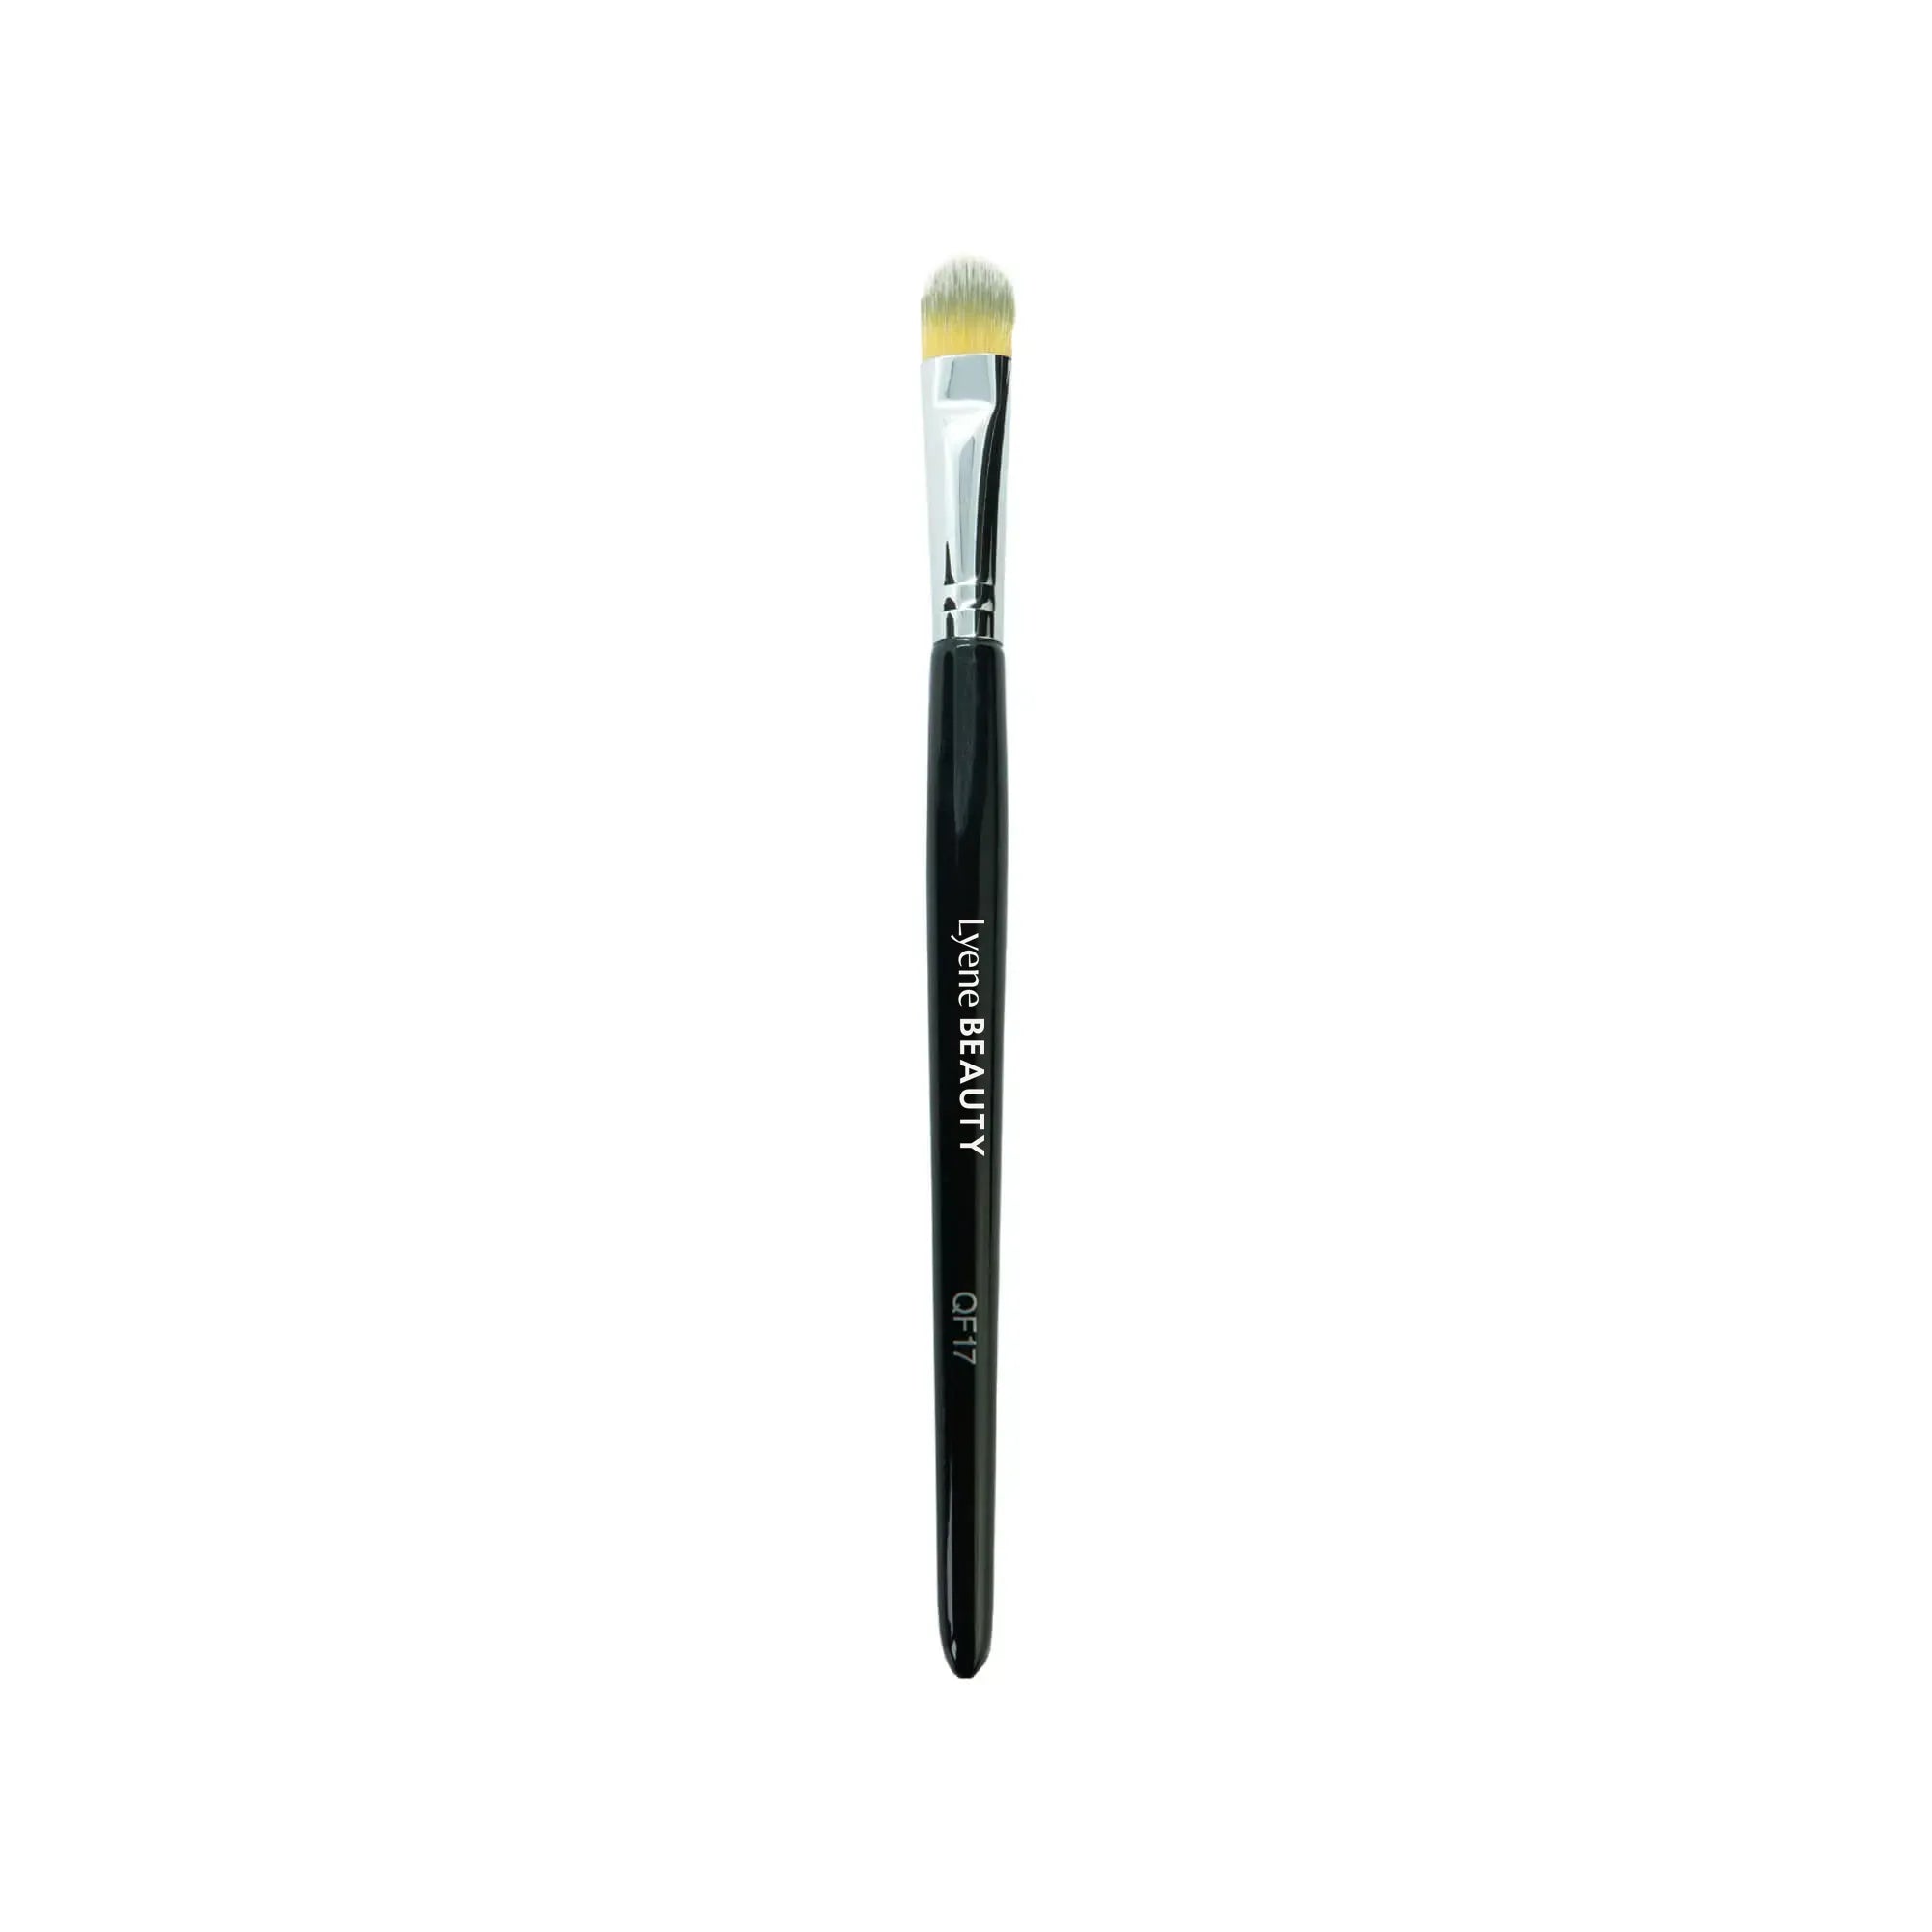 Conceal Brush - Conceal Brush